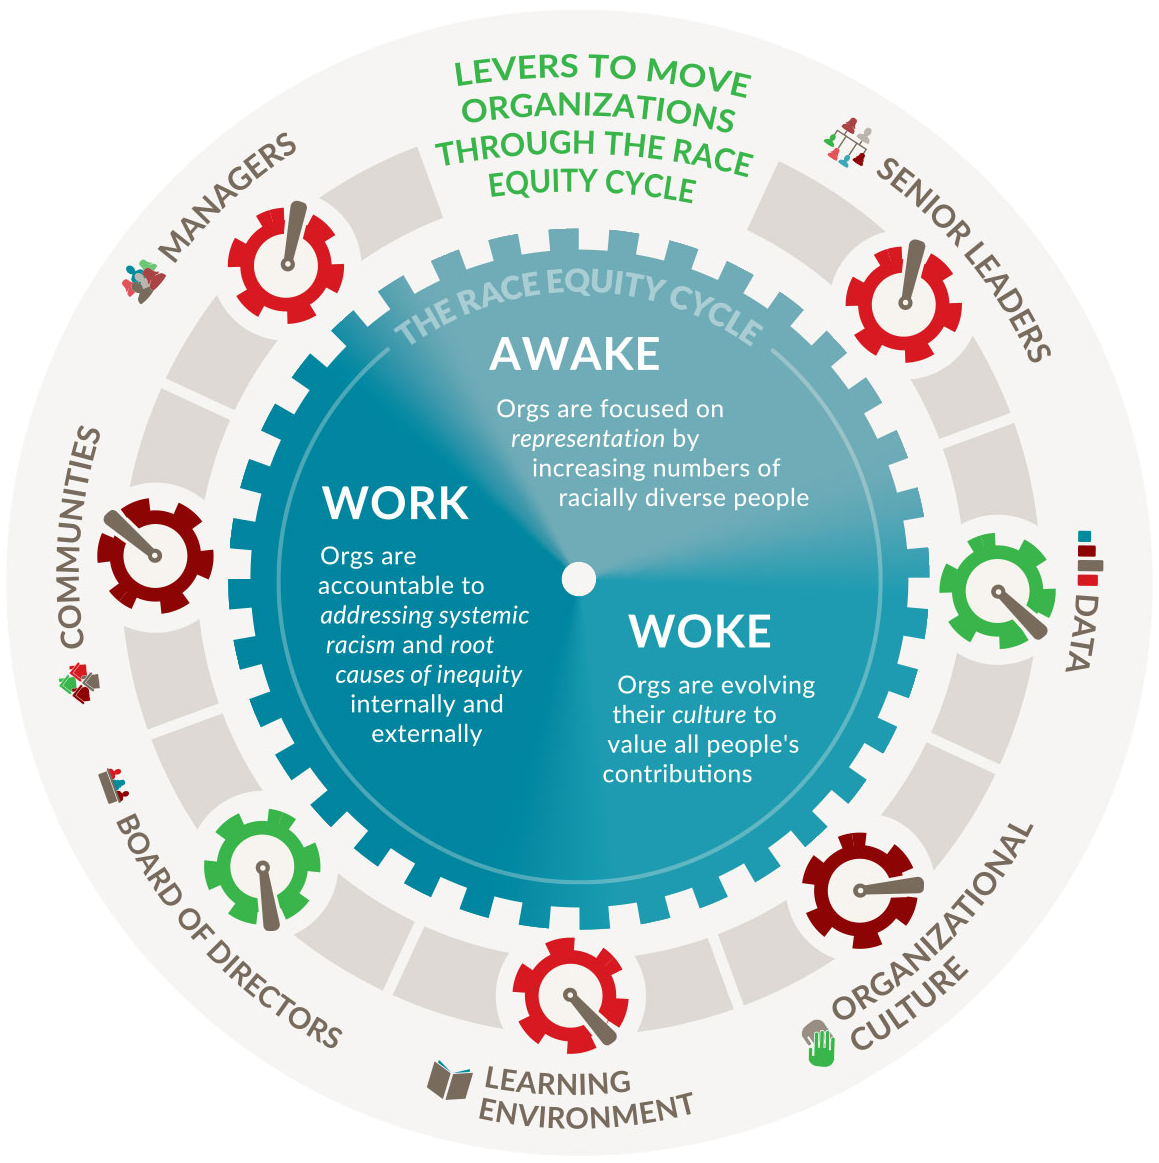 Levers to Move Organizations Through The Race Equity Cycle